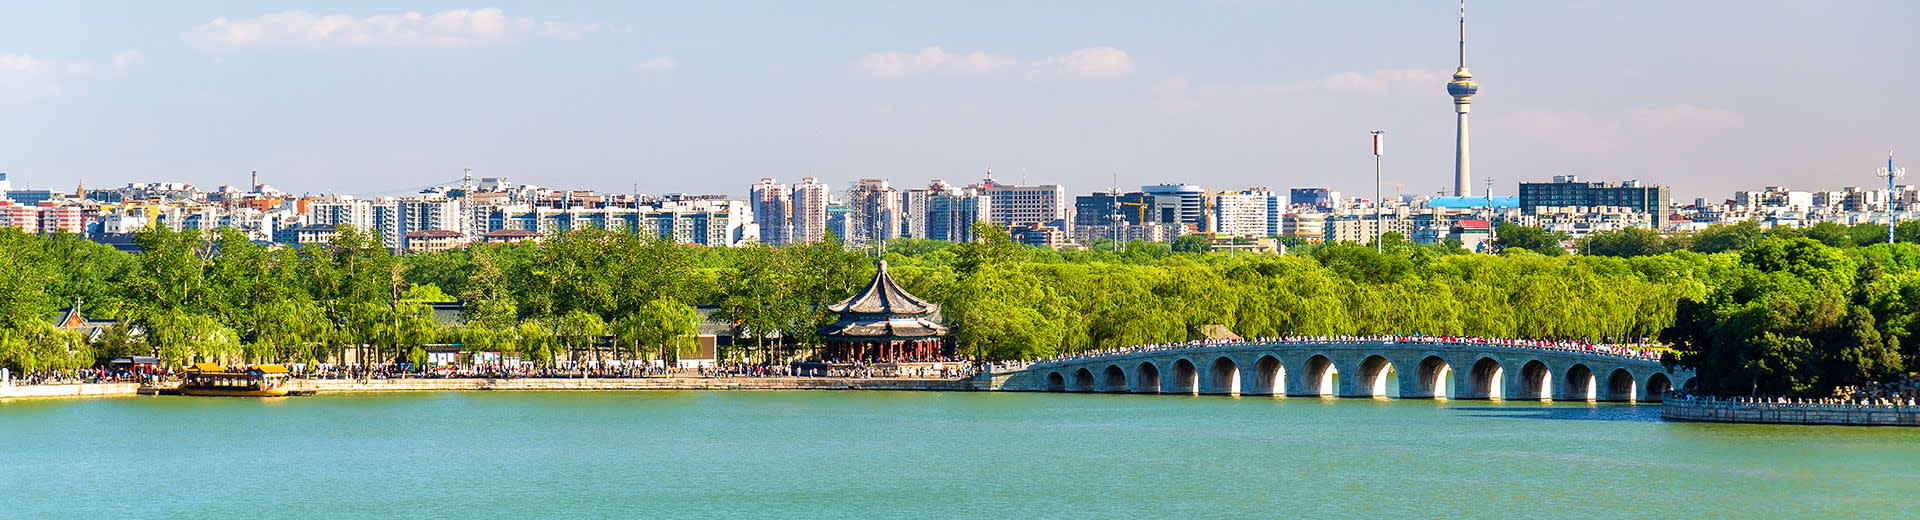 Beautiful blue water passes underneath a bridge, with the skyline of Kunming looming in the background.